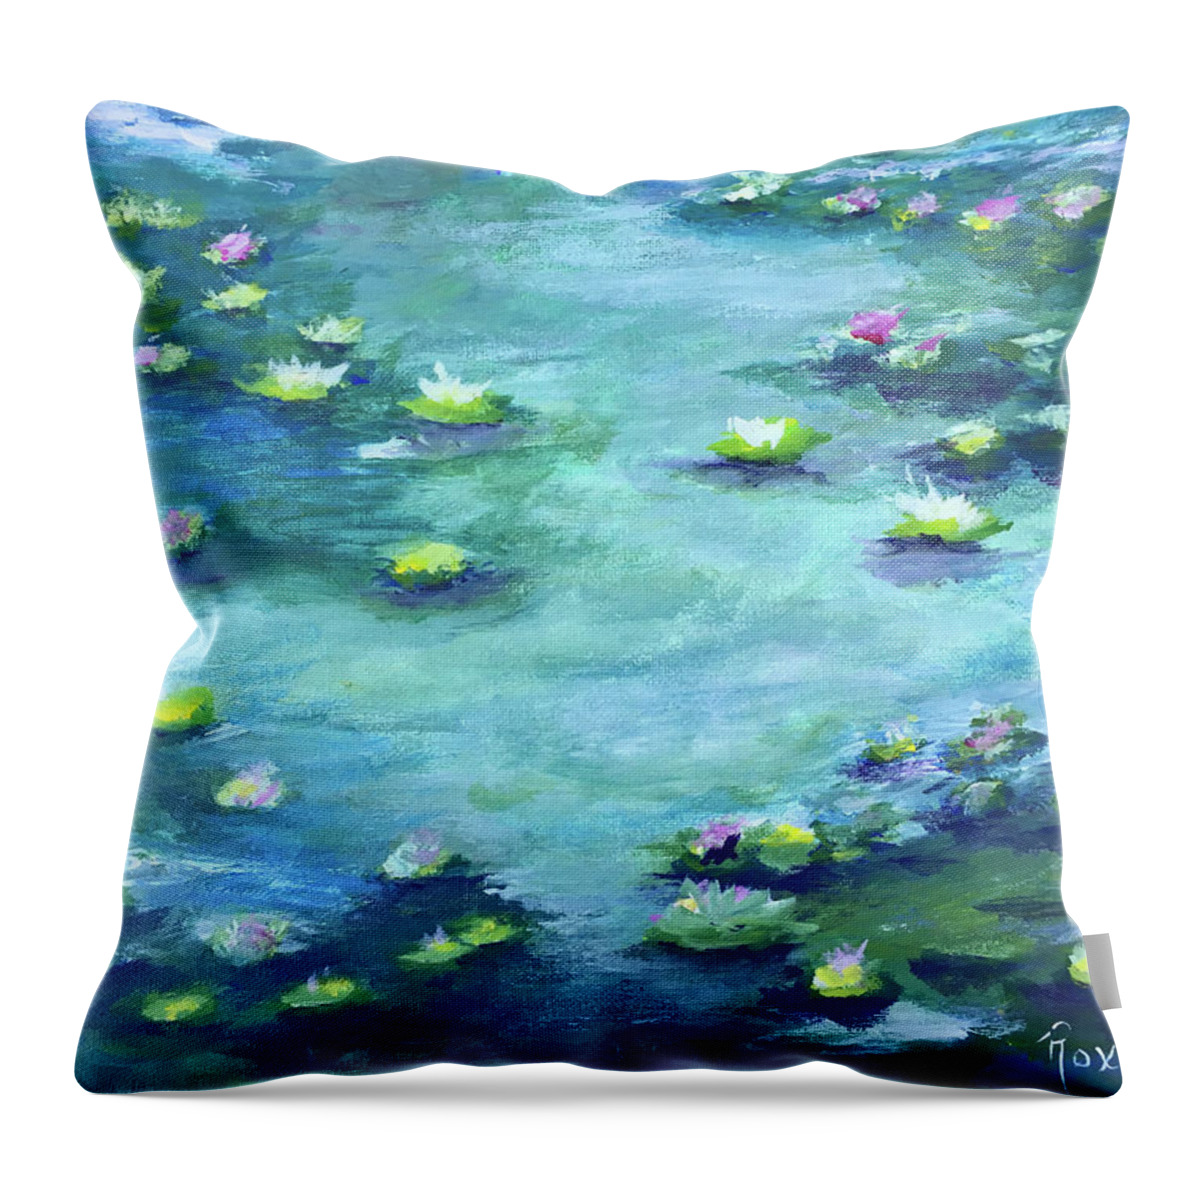 Water Lilies Throw Pillow featuring the painting Lily Pond by Roxy Rich